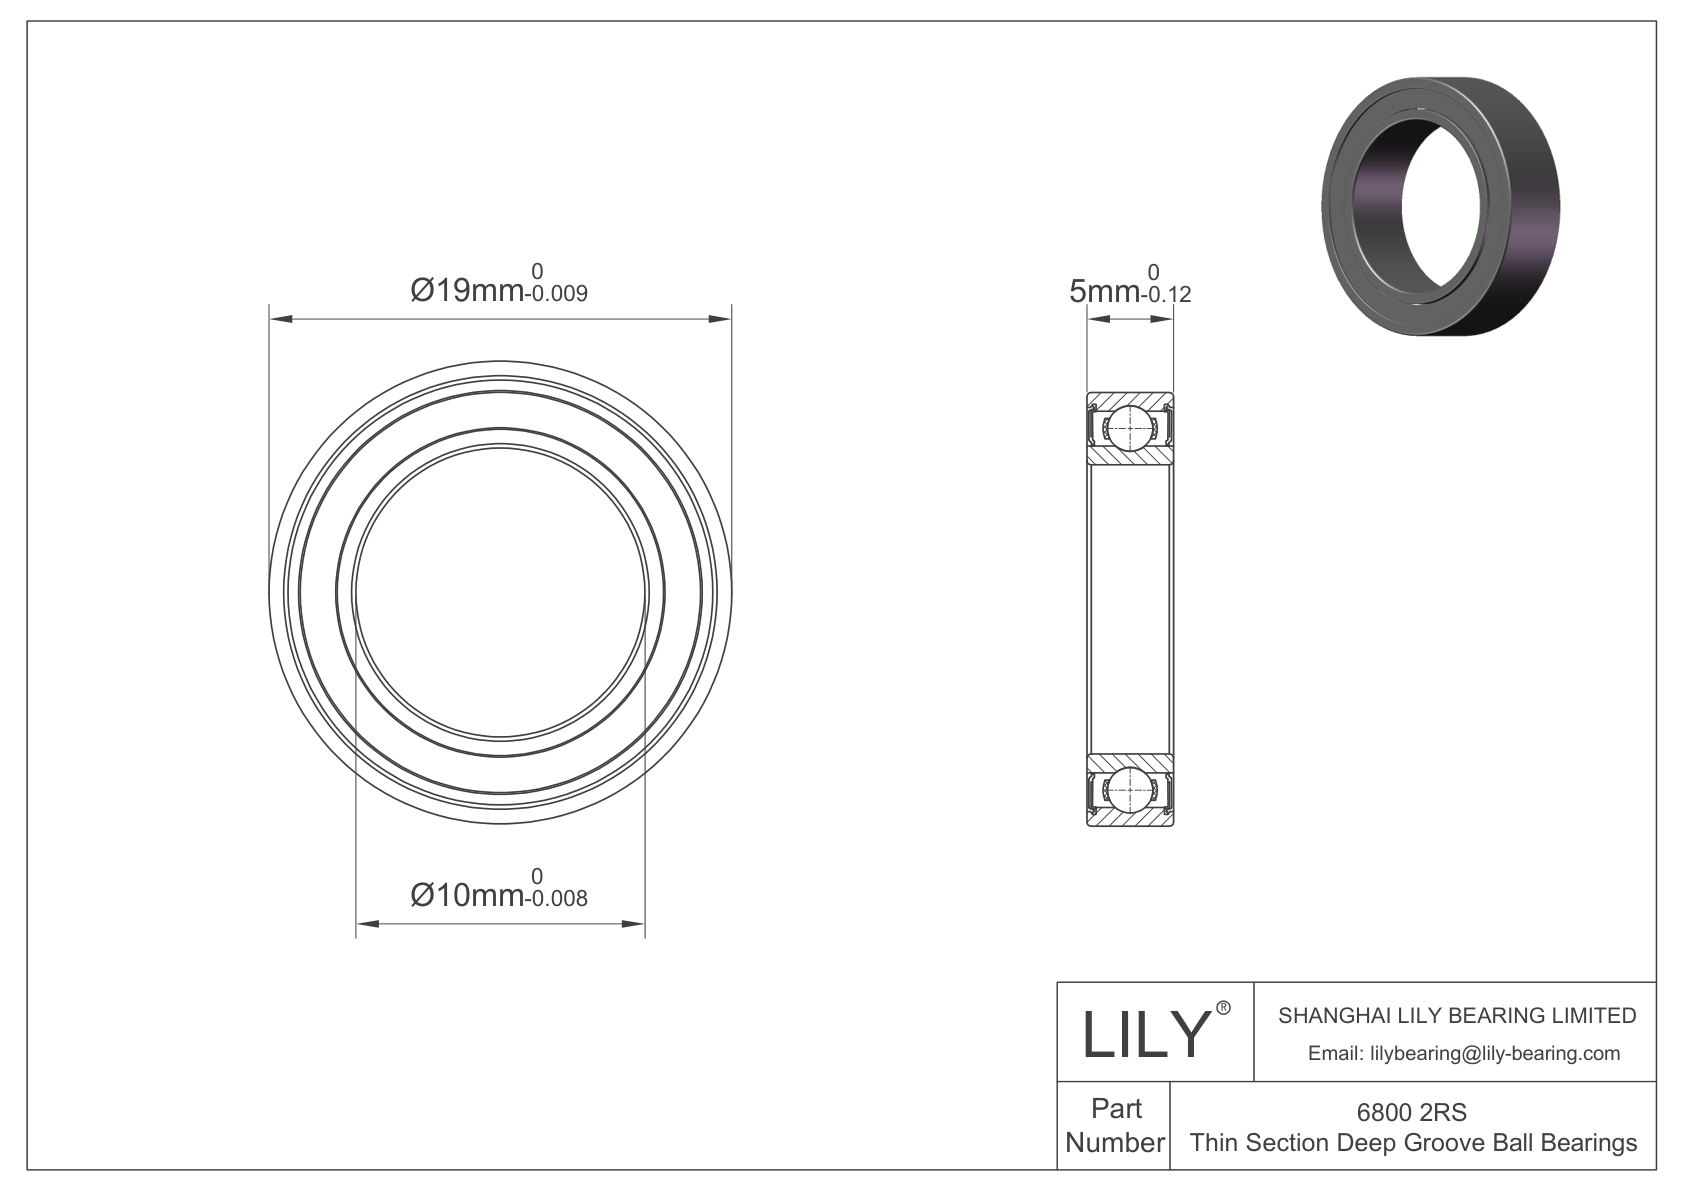 LILY-PUT680030-20 Outsourcing Polyurethane bearings cad drawing